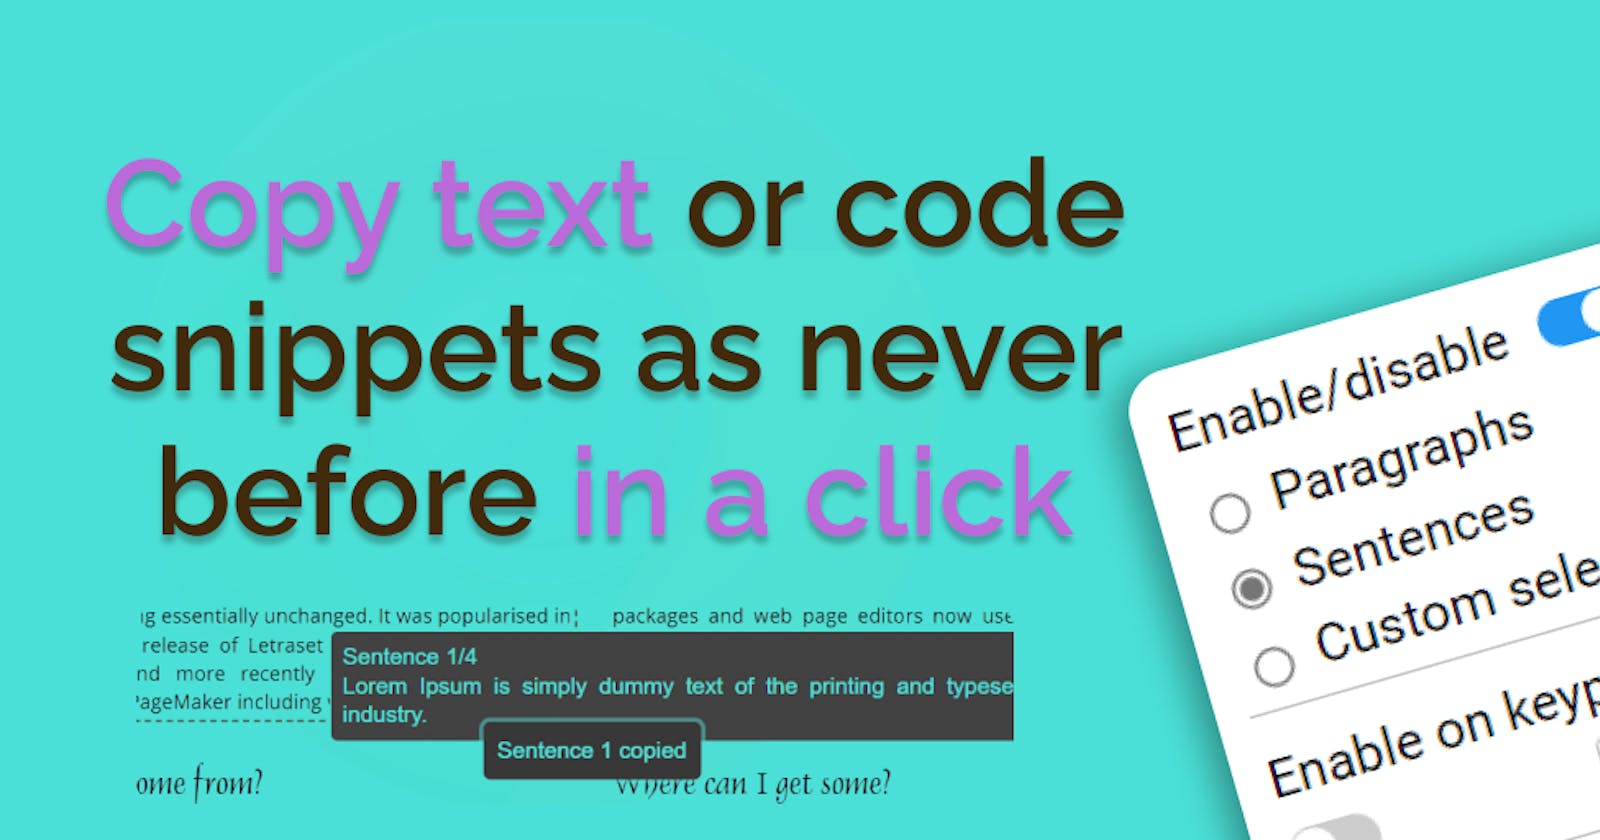 Why I created a tool to copy text/code in a click from any website?